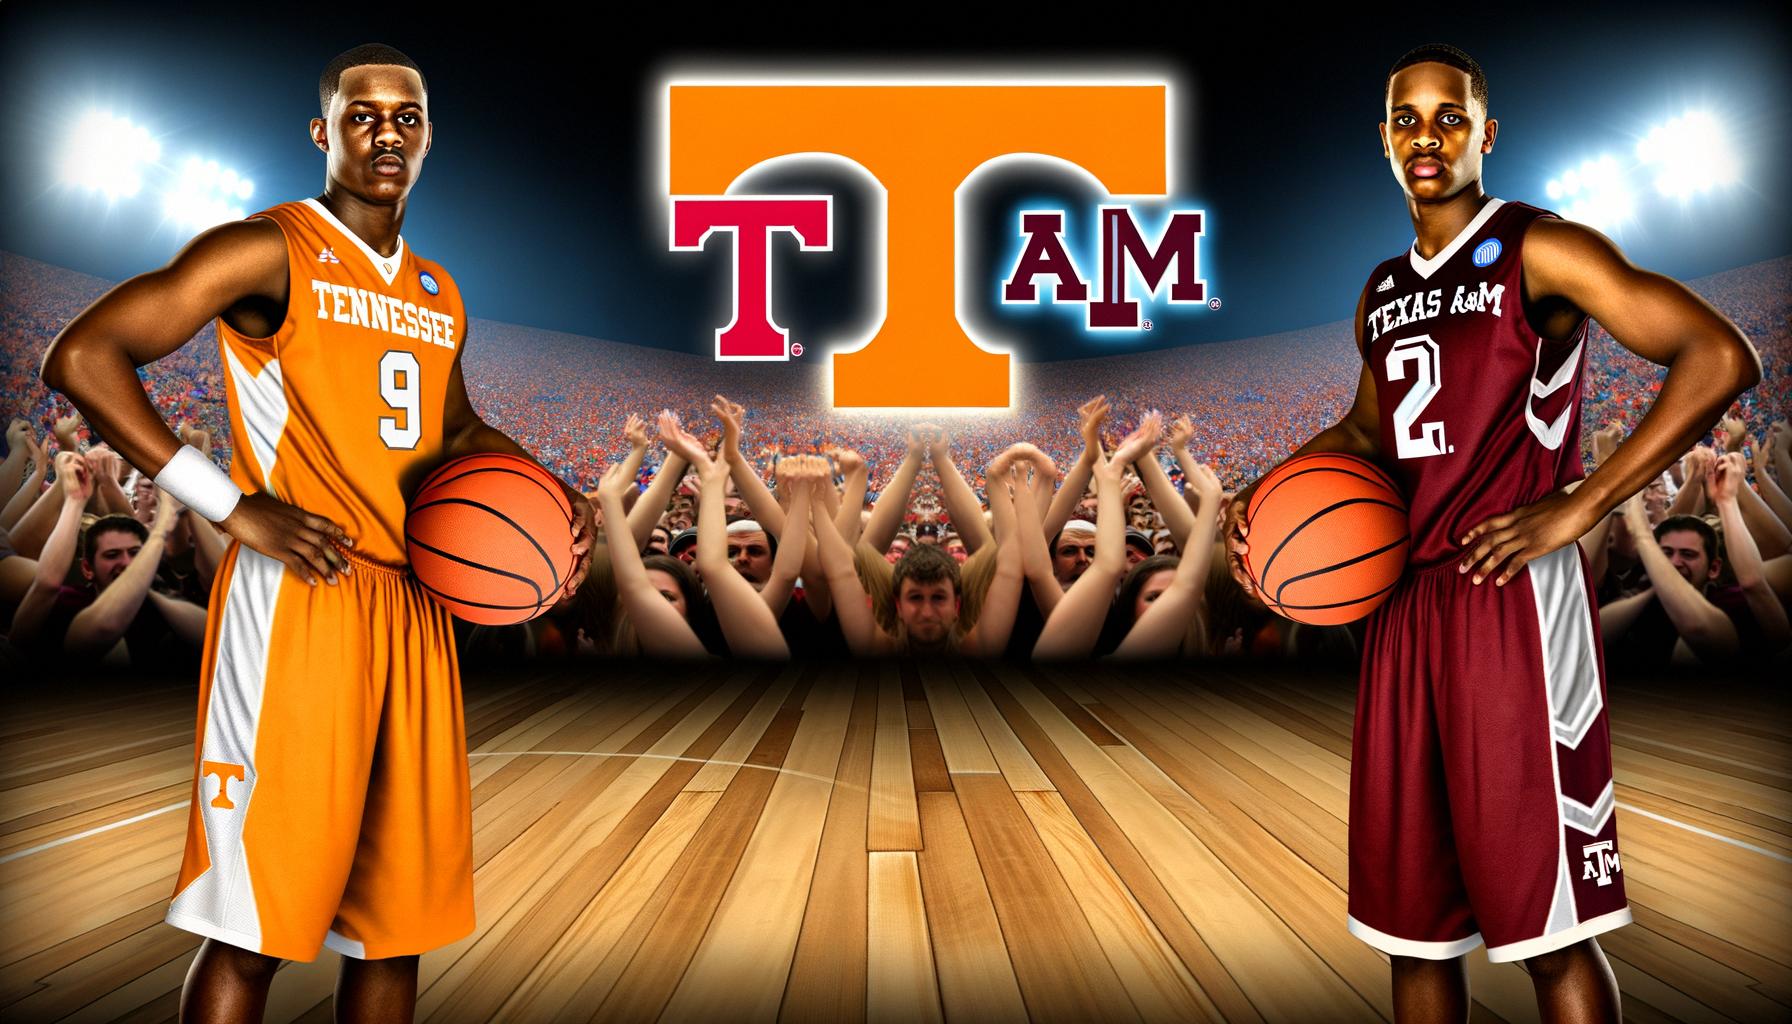 Tennessee and Texas A&M compete for first MCWS title